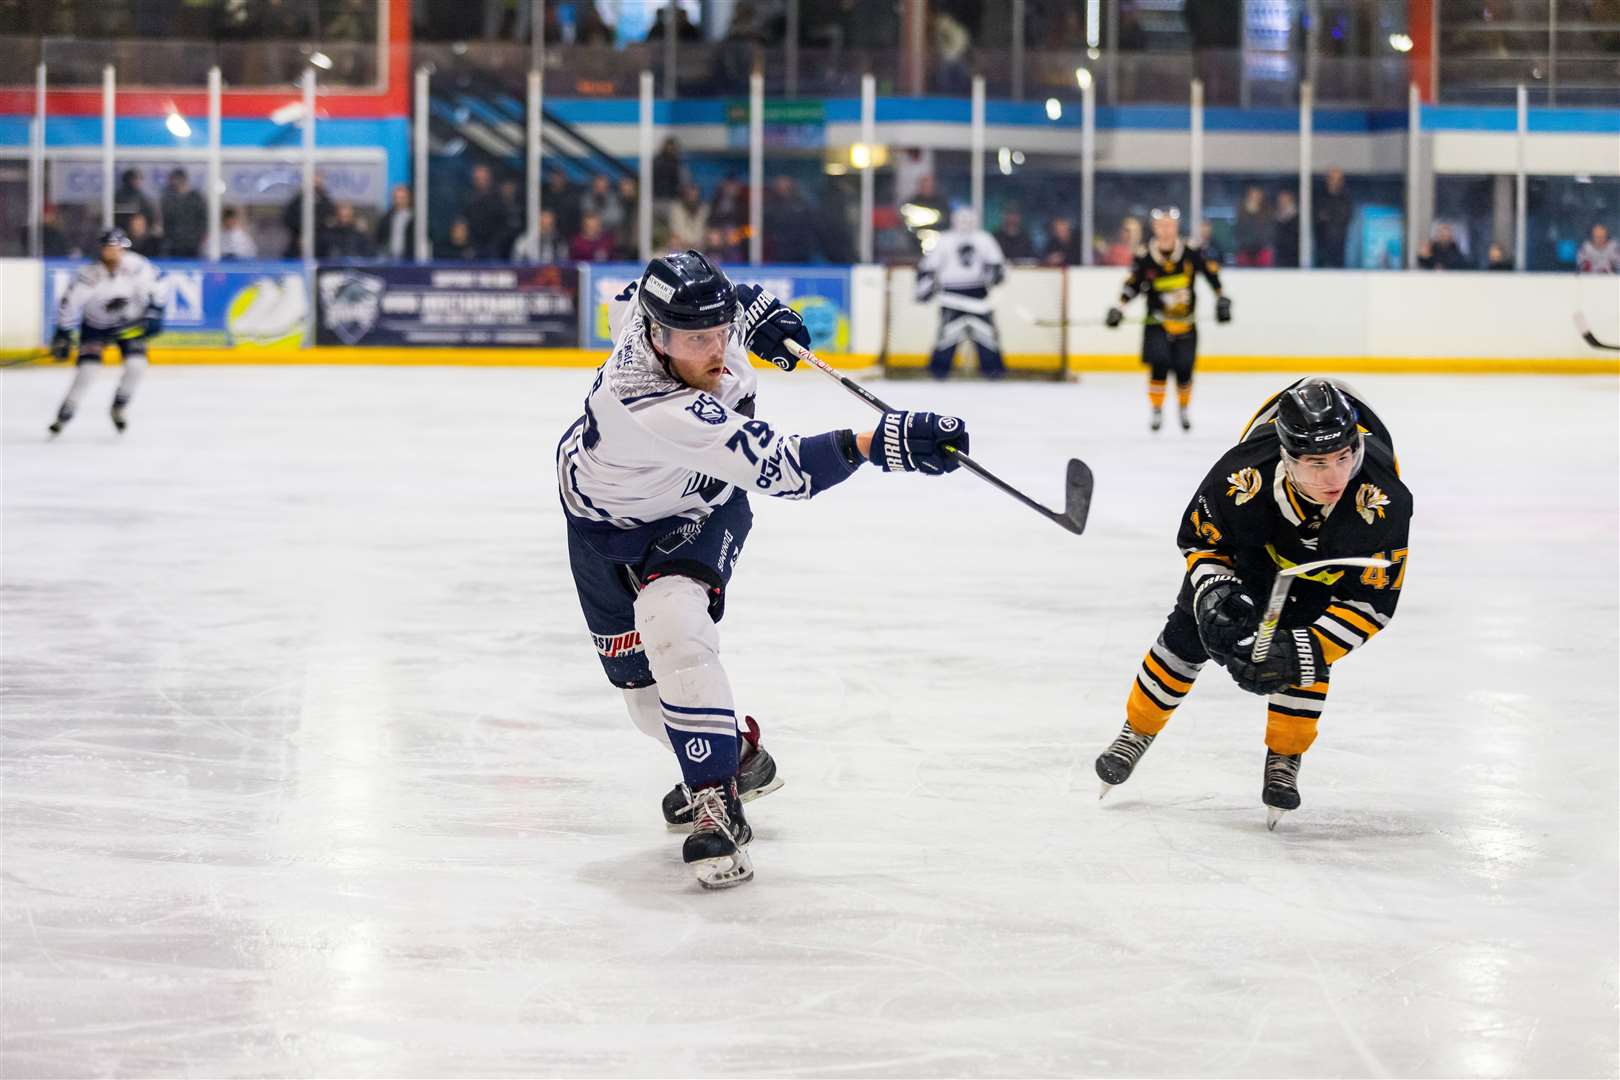 Tom Soar attempts an effort at goal for Invicta Dynamos Picture: David Trevallion